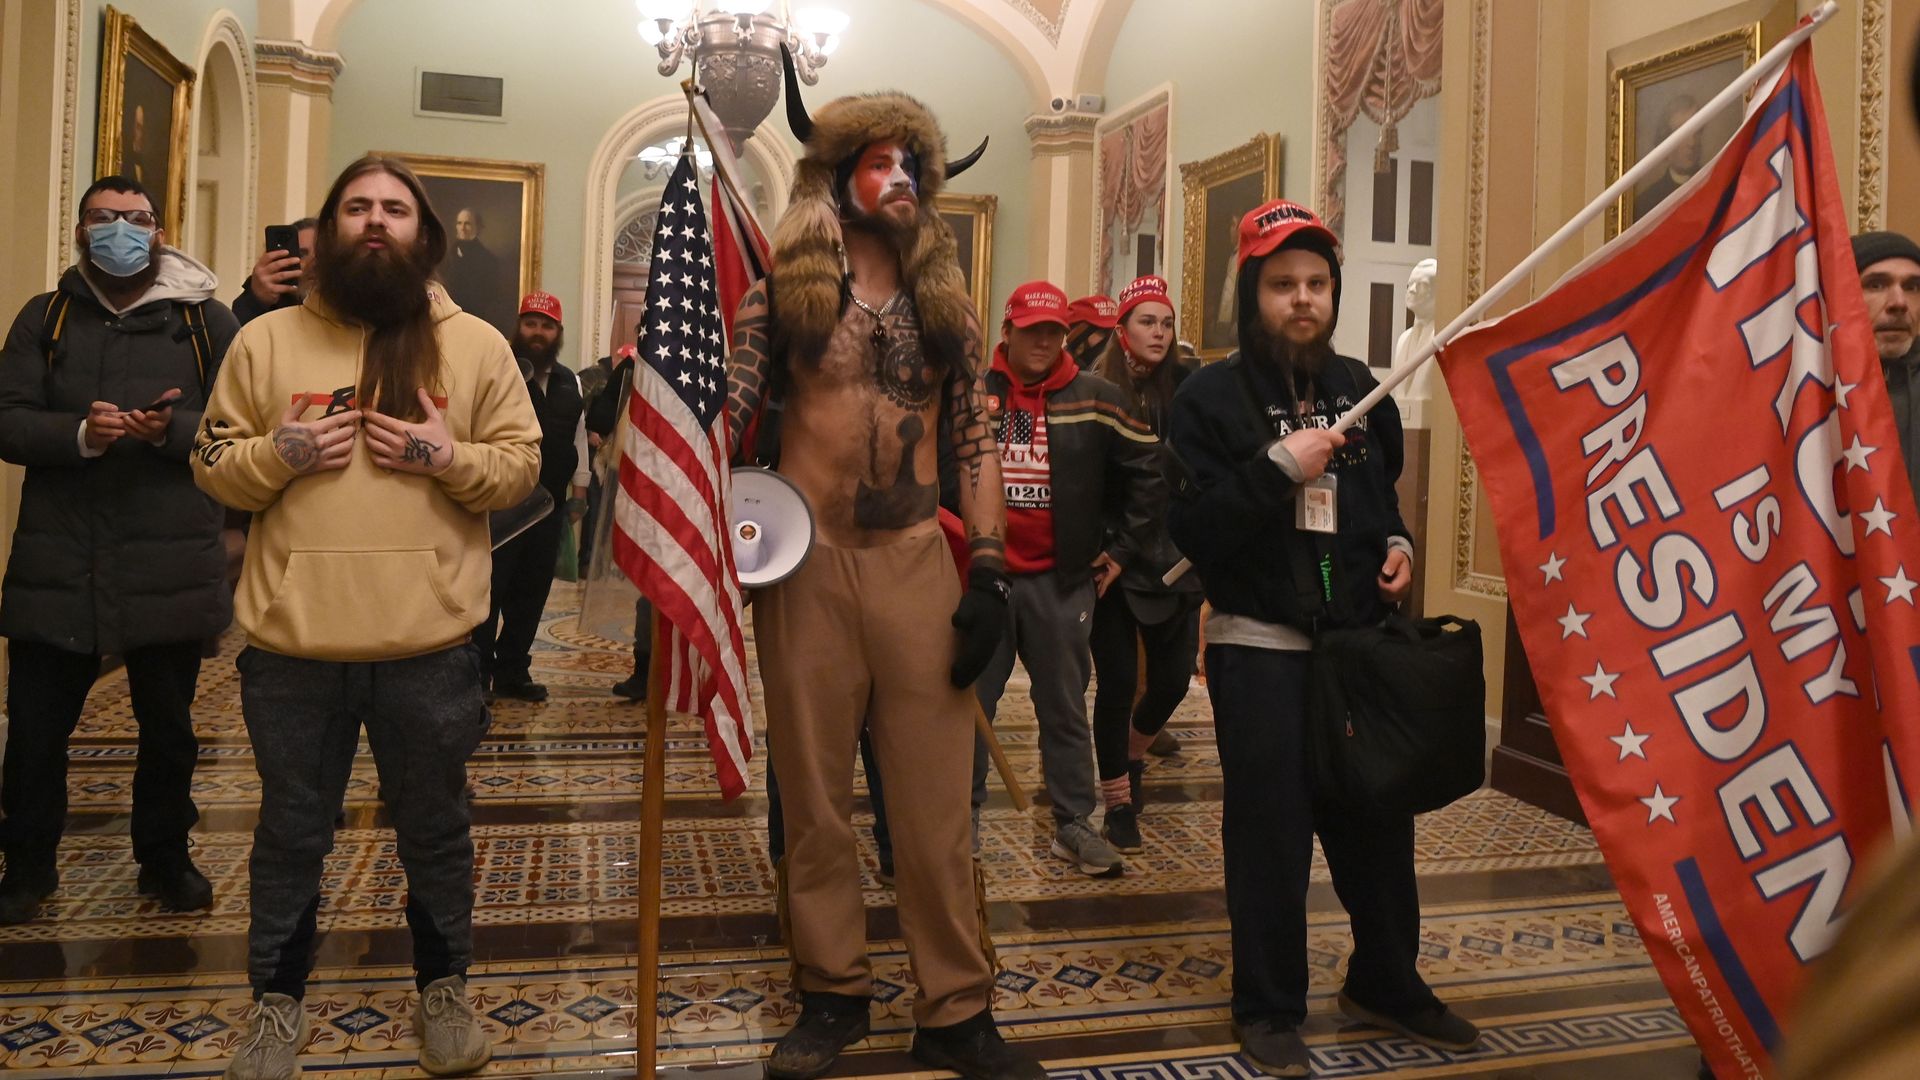 Pro-Trump forces stand outside the U.S. Senate chamber today after breaching the Capitol.